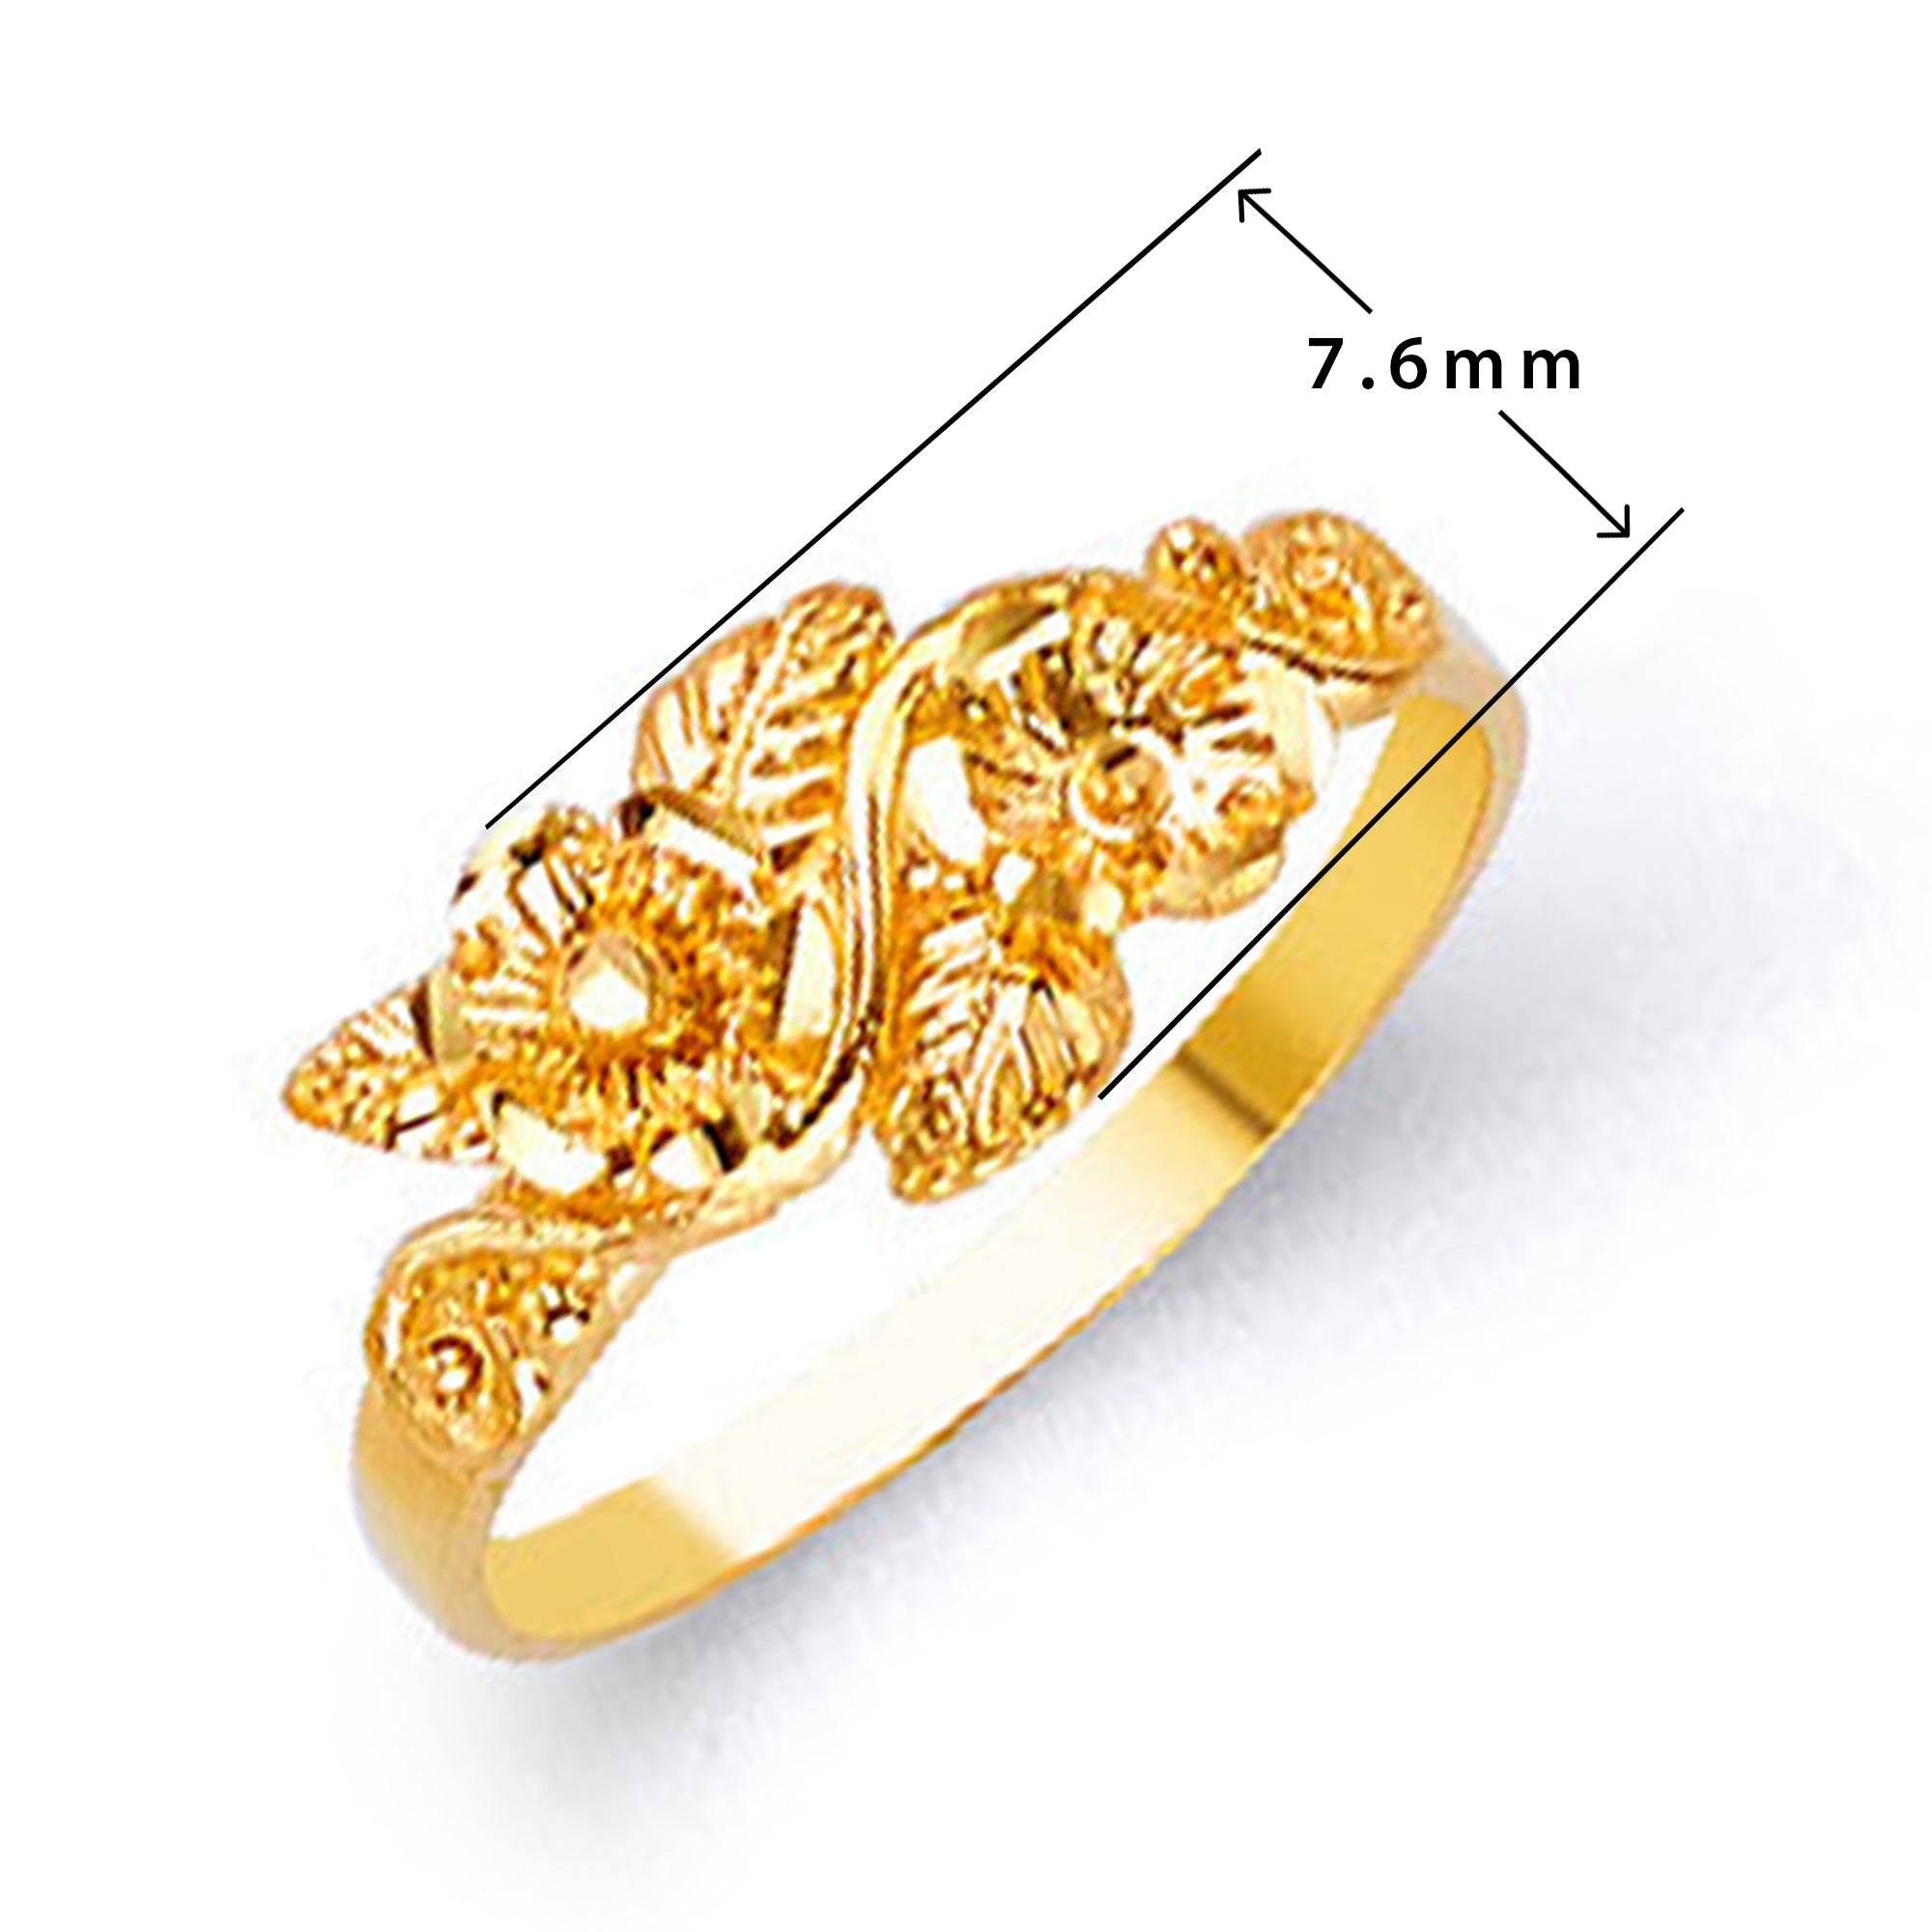 Gorgeous Twisted Ring in Solid Gold with Measurement